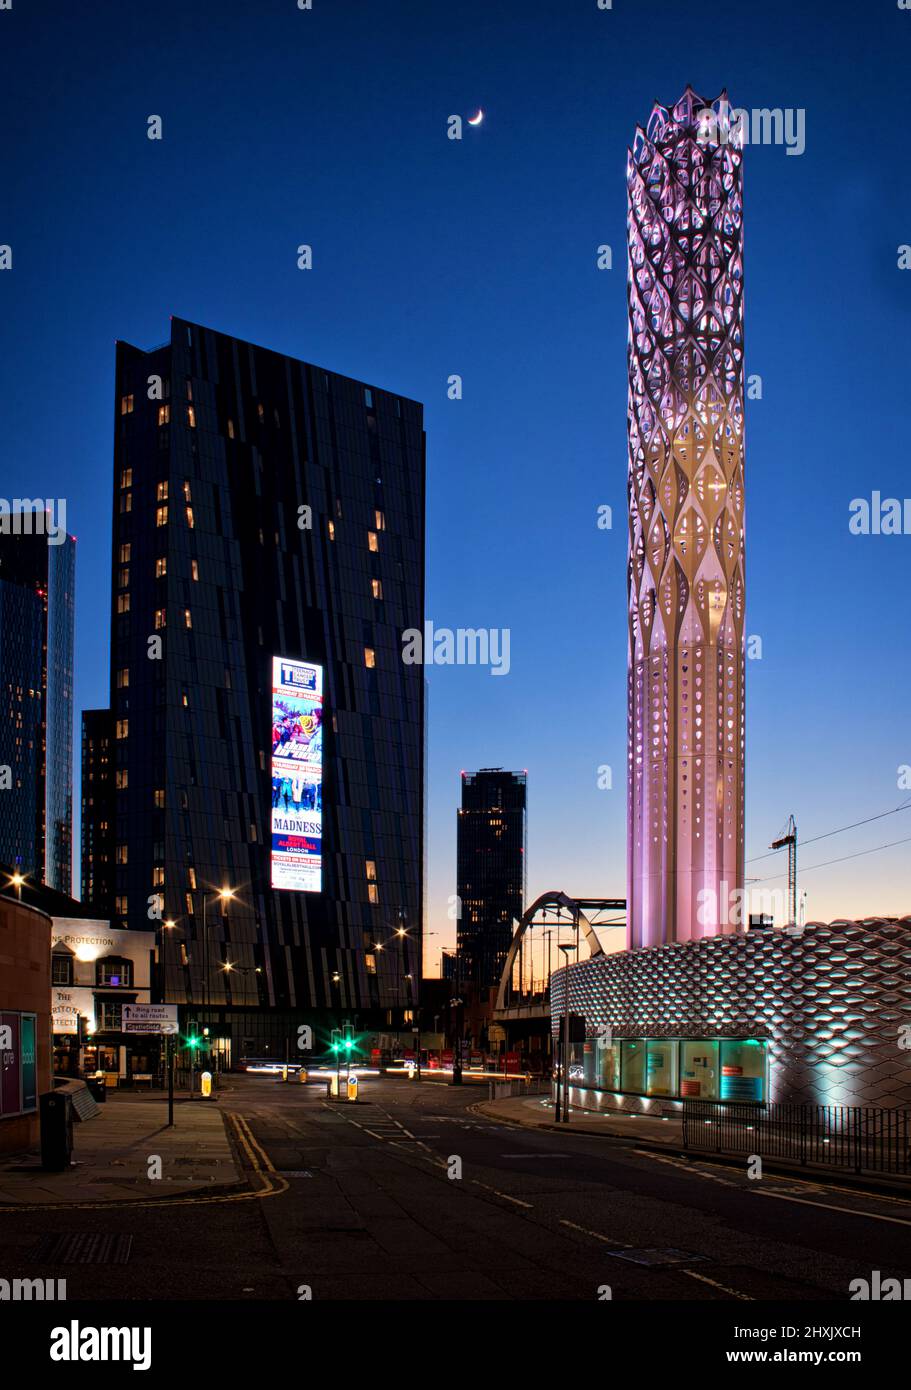 The Tower of Light located in the heart of Manchester, providing sustainable heat and power to many iconic buildings in the city centre. Stock Photo